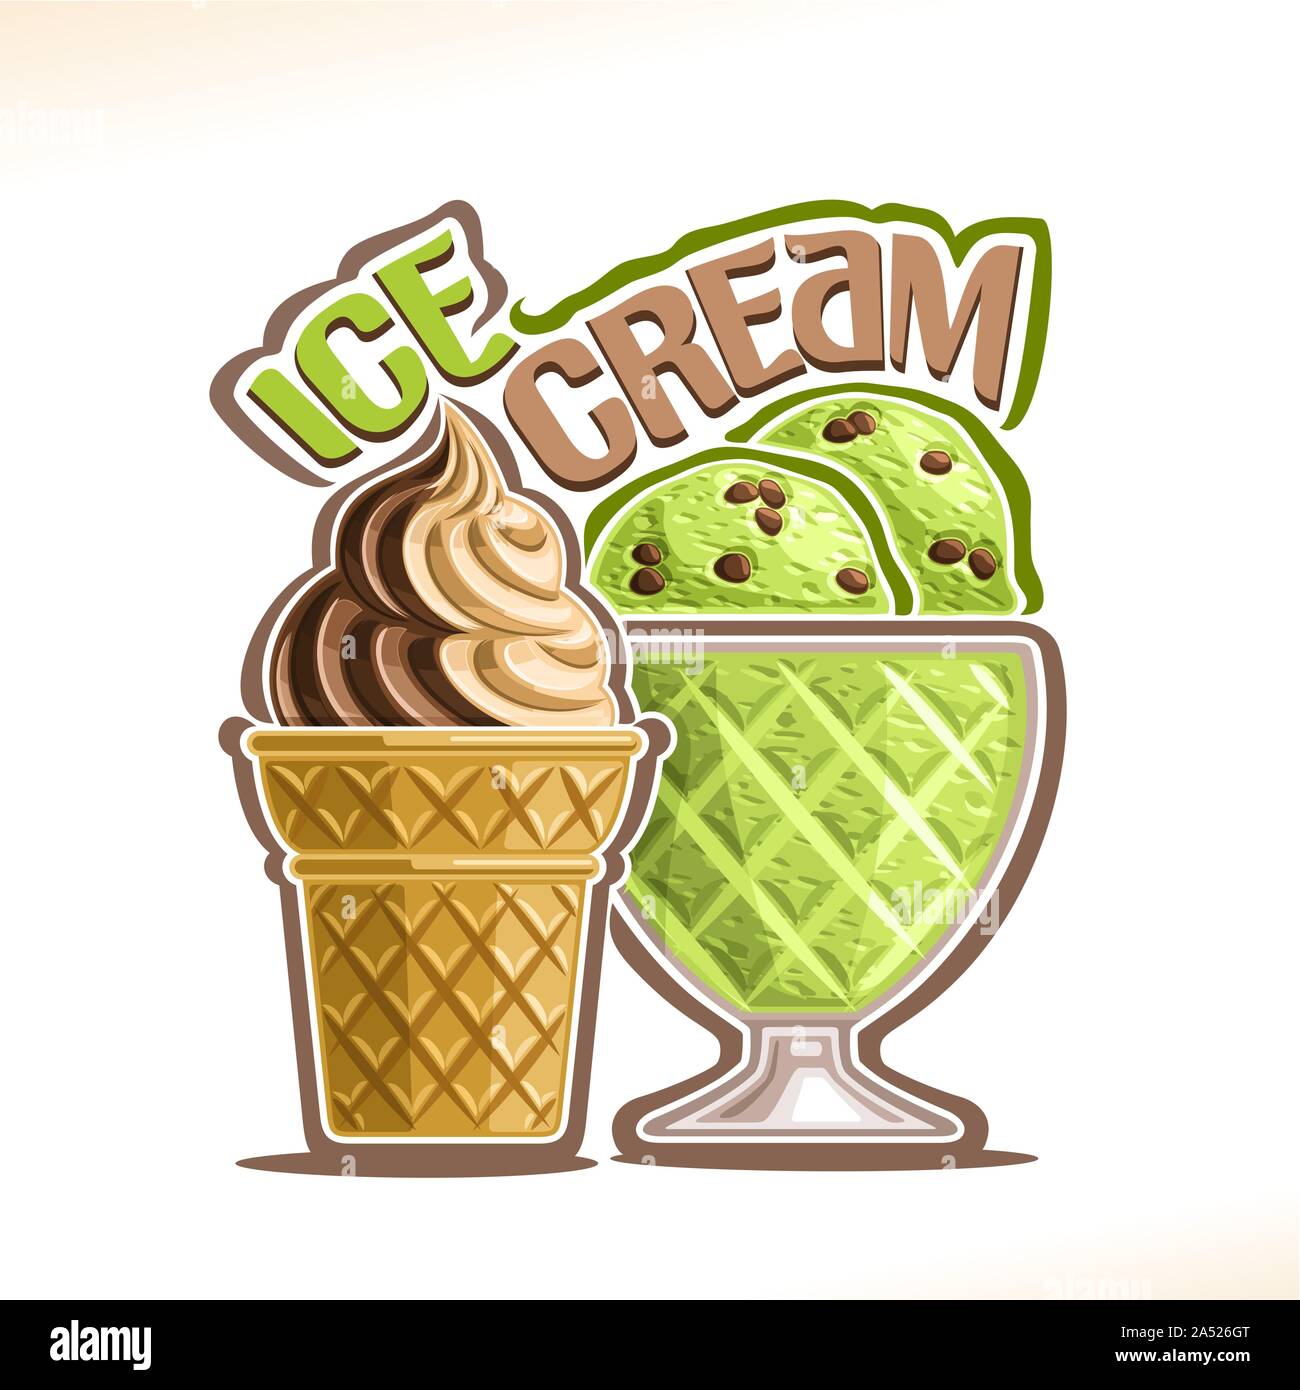 Vector illustration of natural Ice Cream, poster with soft serve creamy chocolate icecream in waffle cone, green mint italian gelato with choco chips Stock Vector